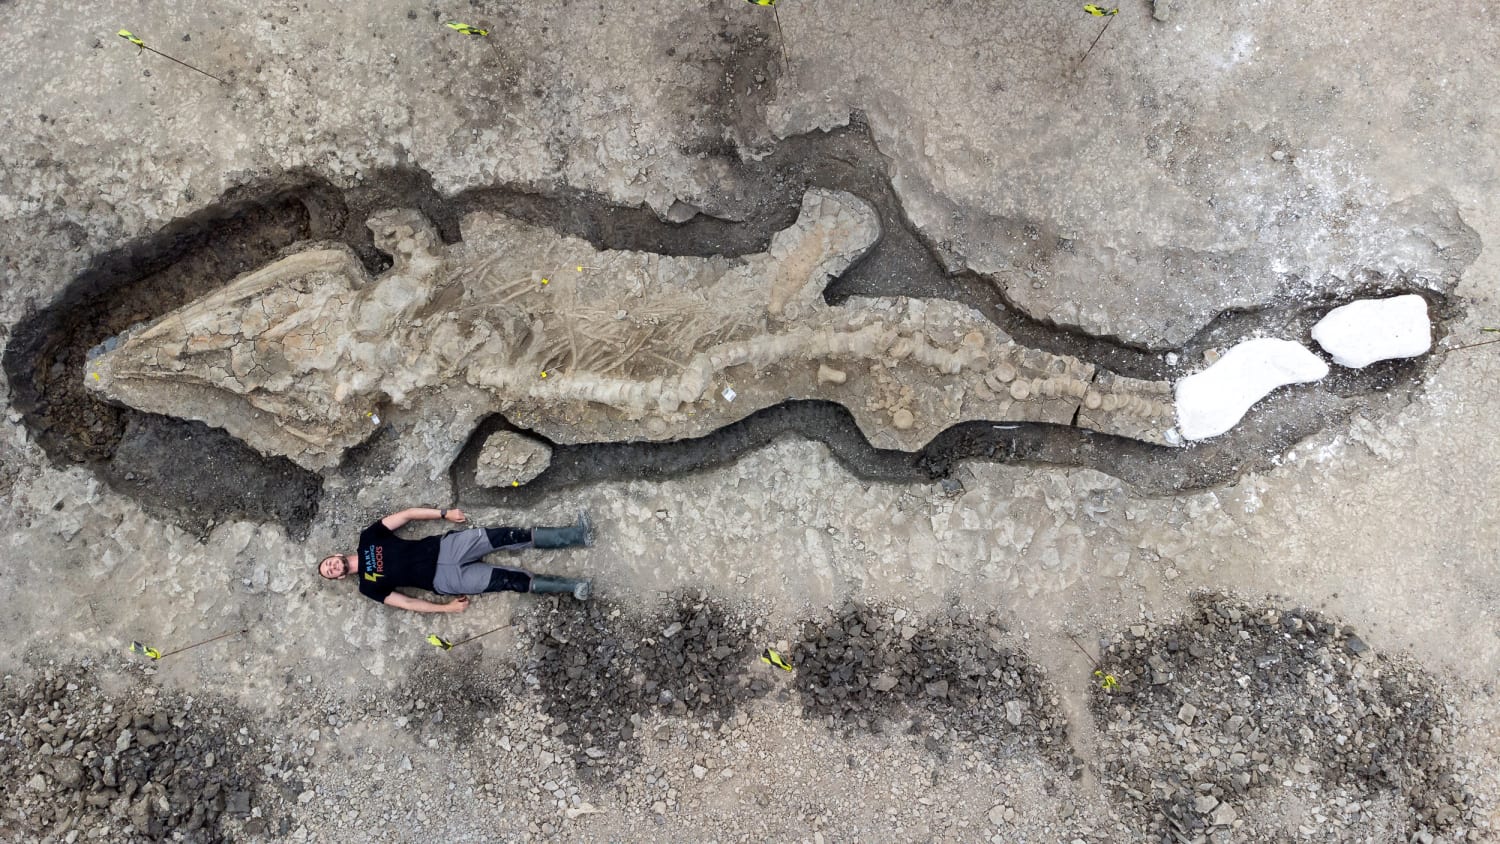 Scientists unearth a 32-foot-long prehistoric ‘sea dragon’ fossil in Britain